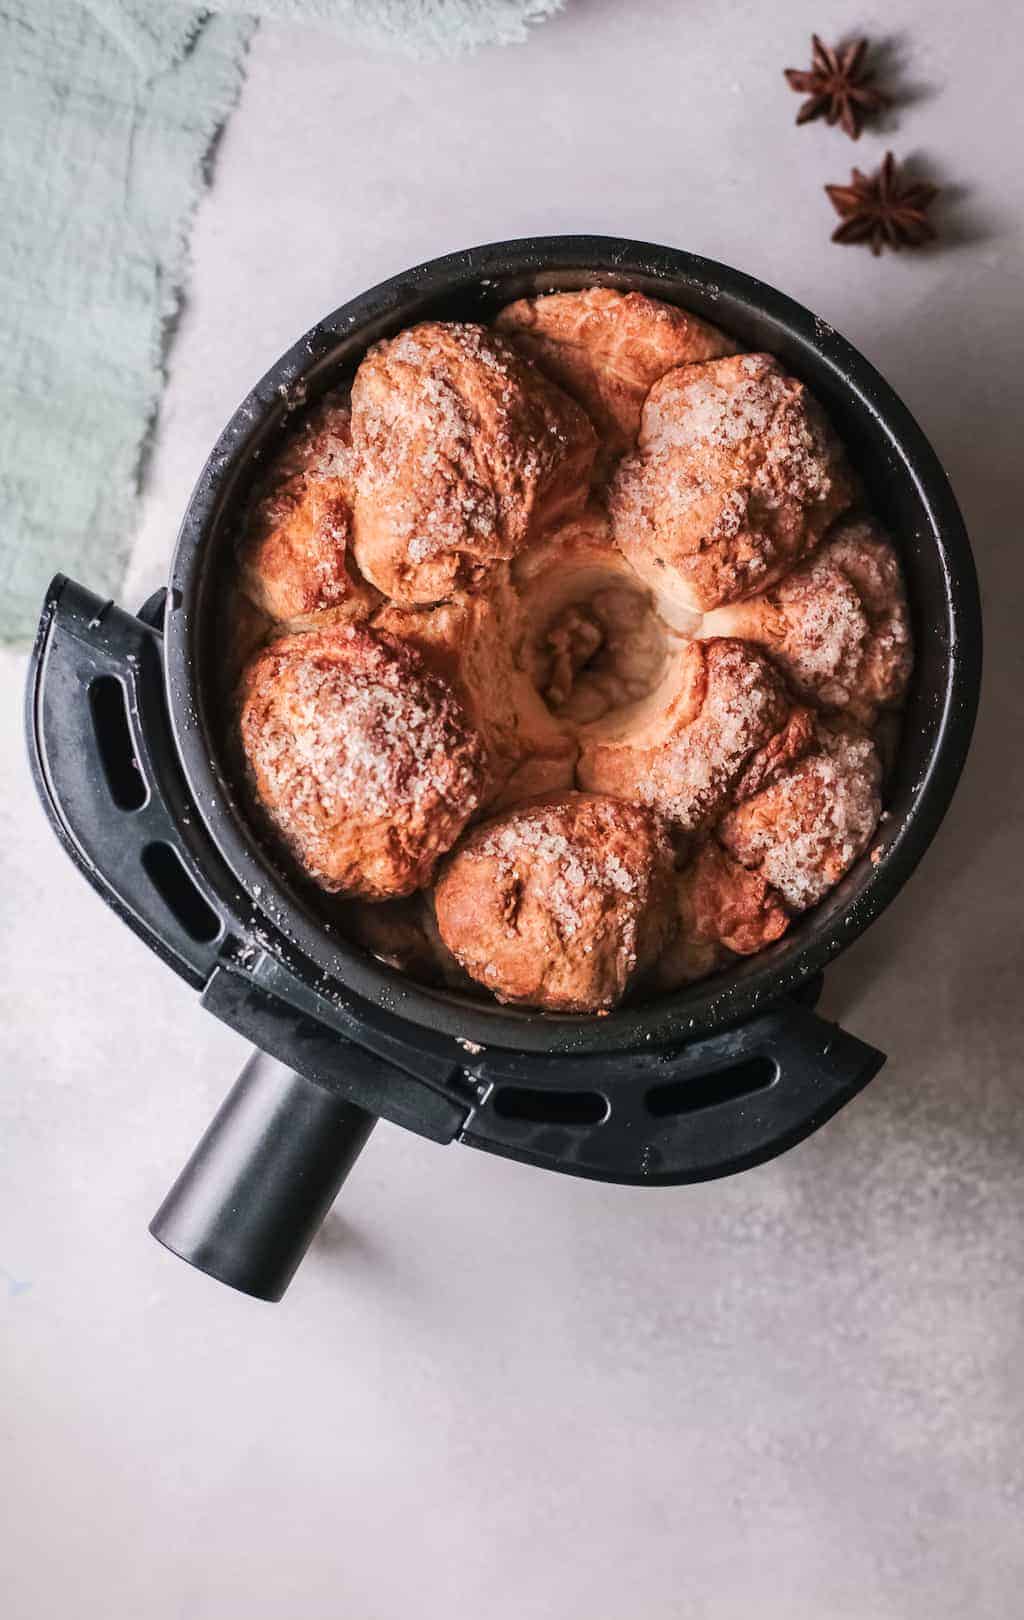 Overhead view of cooked air-fried monkey bread placed in the air-fryer basket.